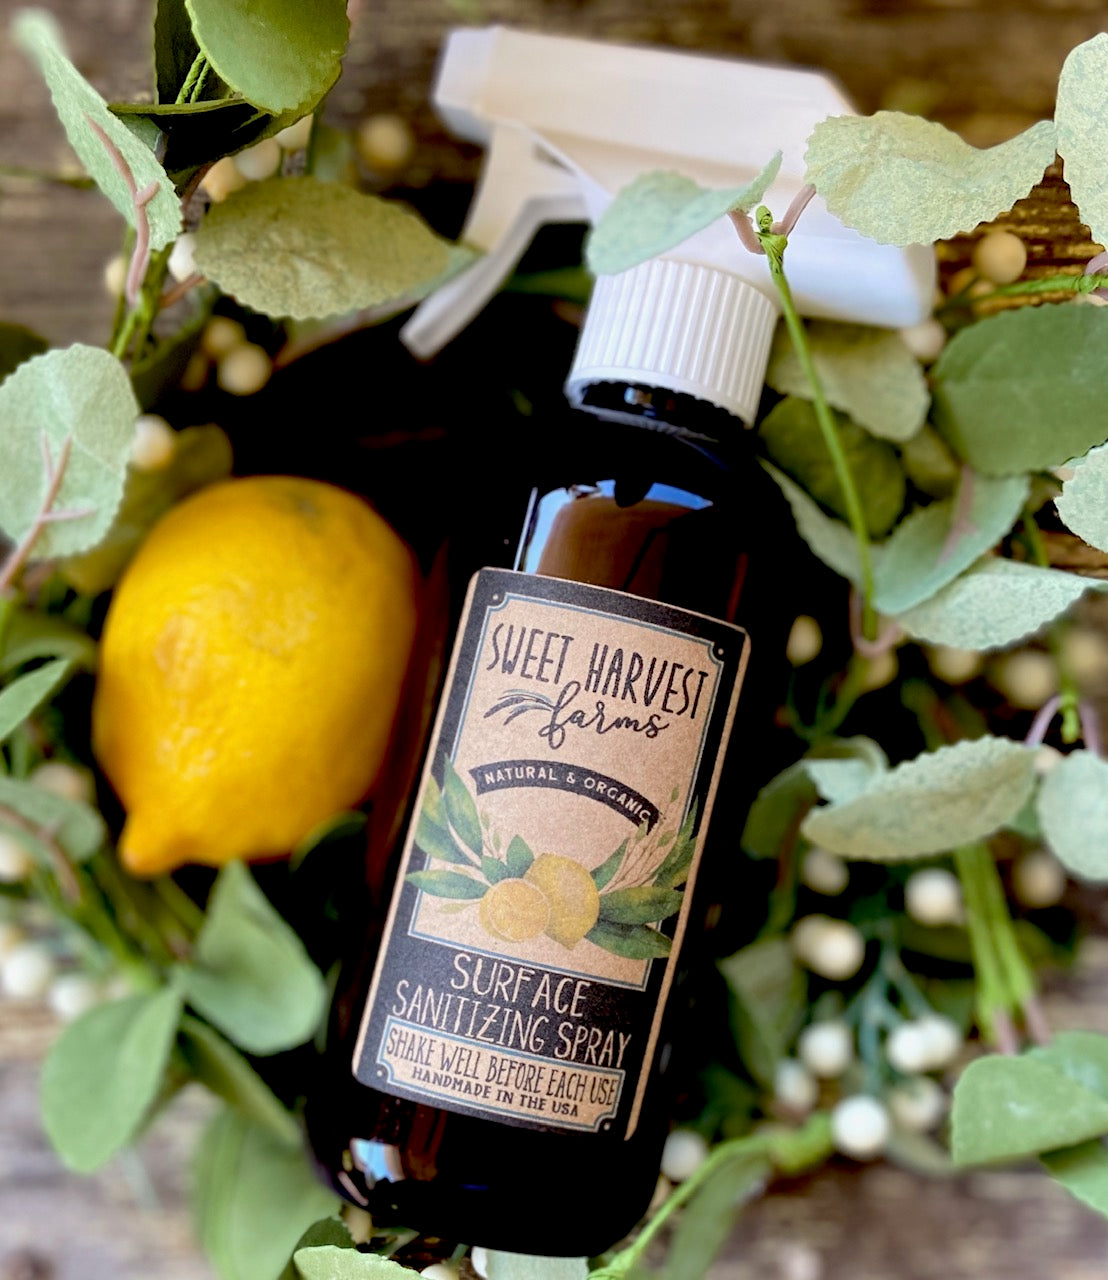 Sweet Harvest Farms sanitizing surface spray is organic and natural, easy to use on surfaces that may be contamintated. This surface spray cleans as well as disinfects. This surface spray contains our aromatic signature scent so it smells amazing!